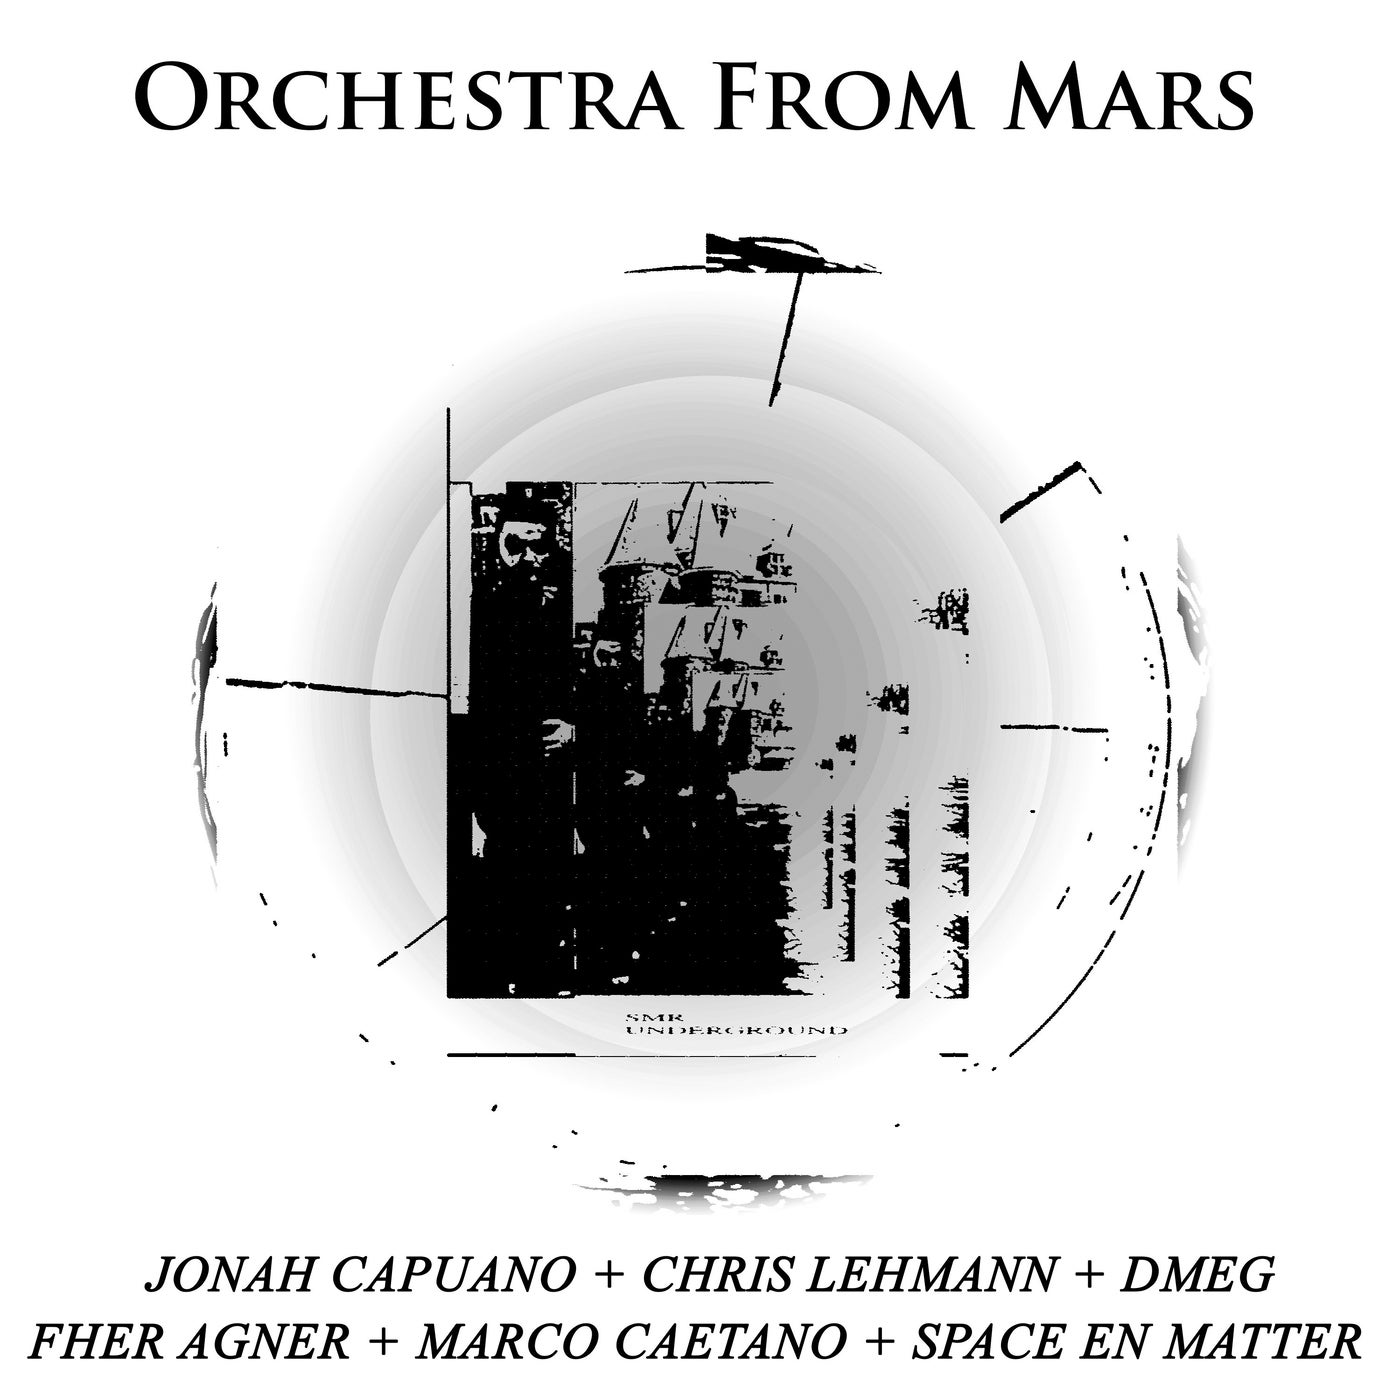 Orchestra From Mars - The Remixes